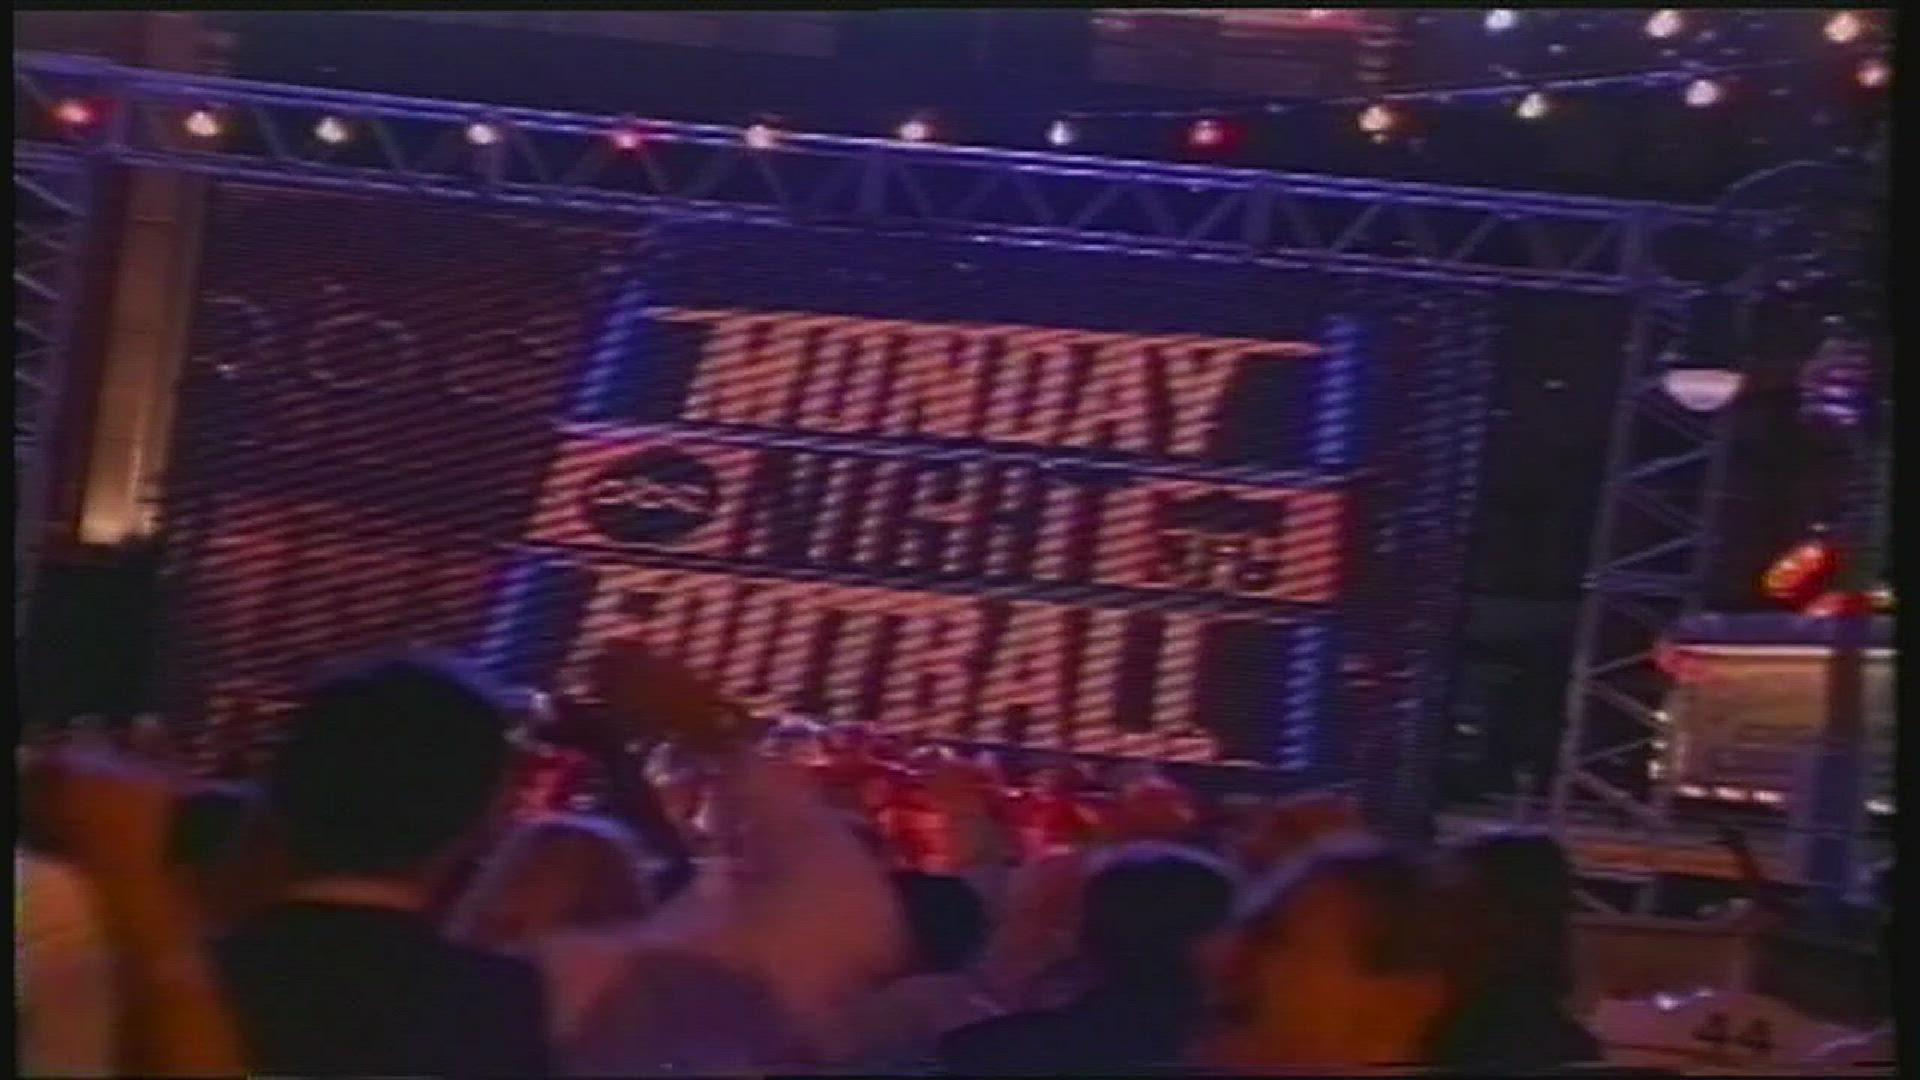 In 1995, WQAD-TV got a peek behind the curtain of all the work that goes into a Monday Night Football broadcast on ABC.